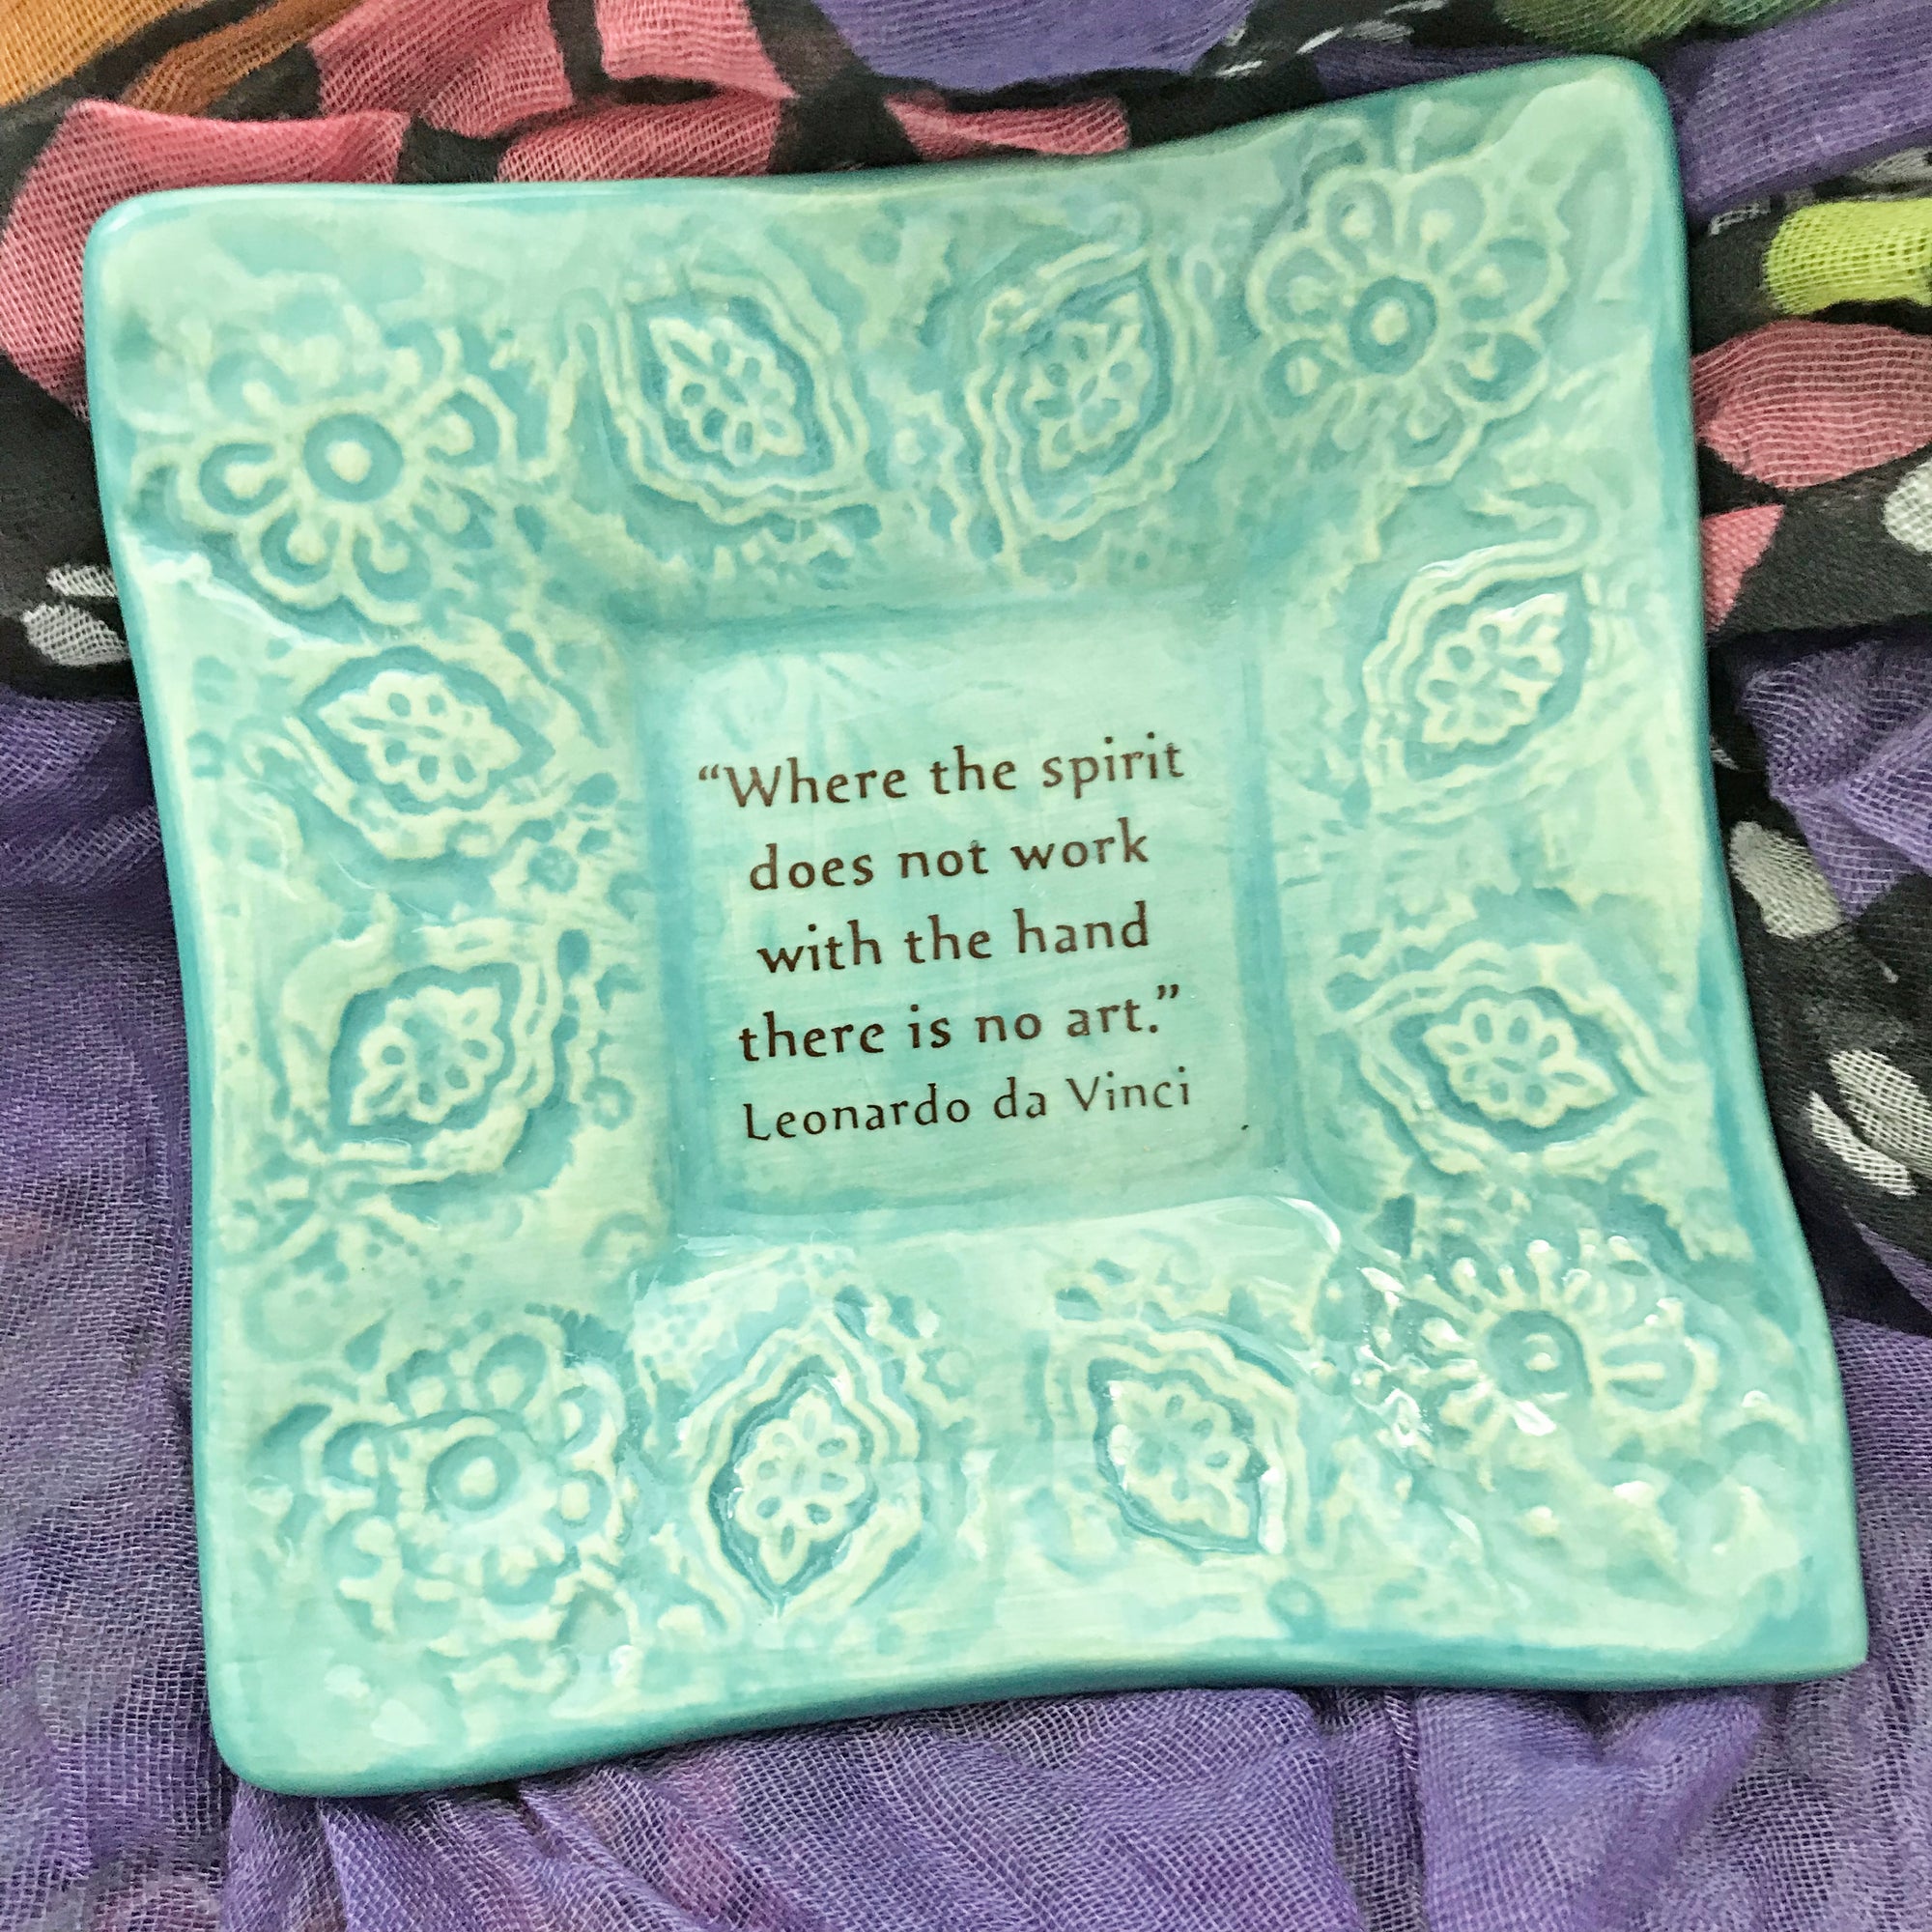 "Where the spirit does not work with the hand there is not art."  Quote by da Vinci on Oerth Studio's handmade pottery dipping dish. 